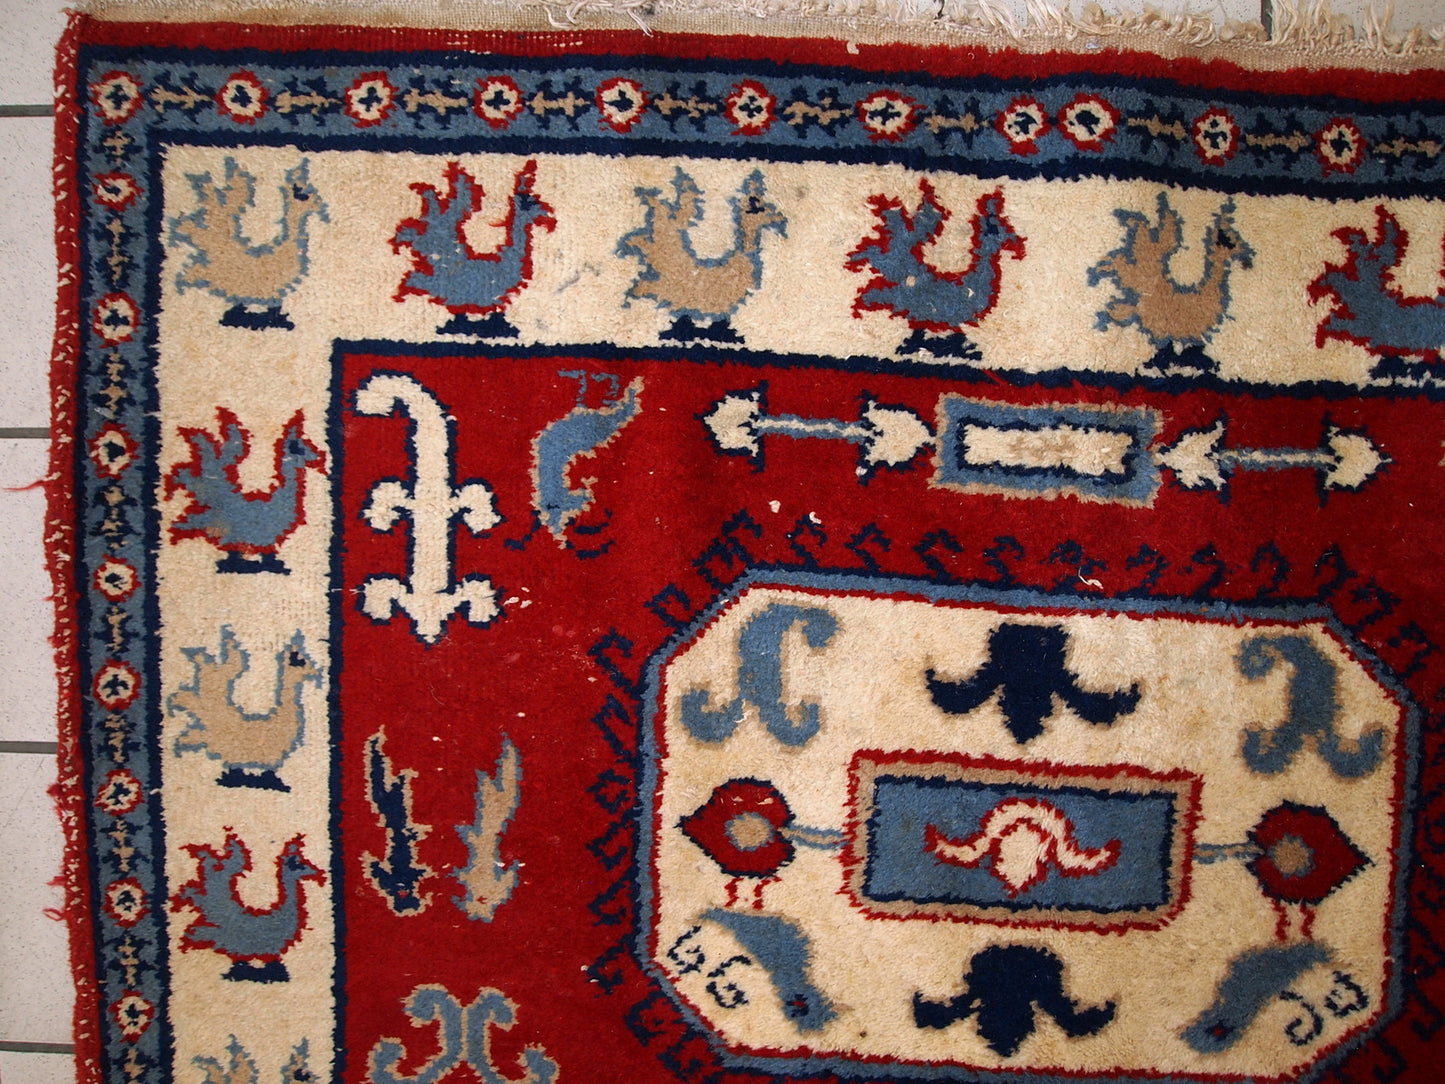 Handmade Russian vintage rug in deep red shade. The beige border decorated in roosters. Made out of wool, the rug is very thick and warm. It is in original good condition.